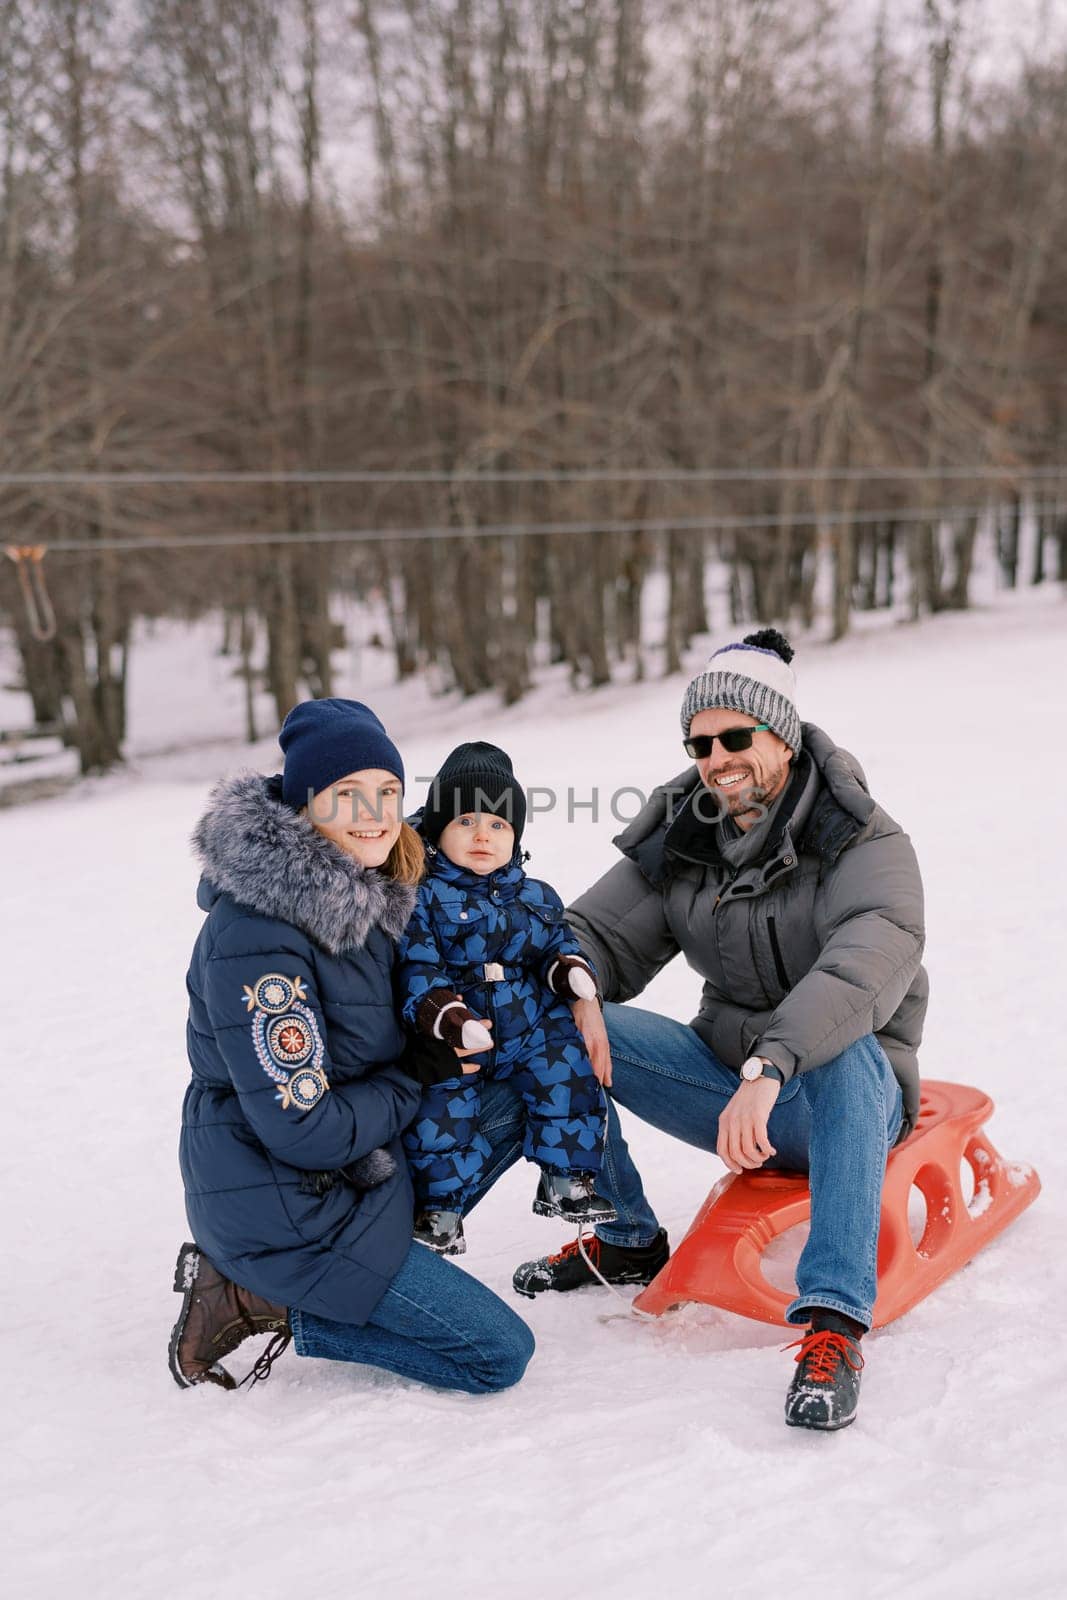 Smiling dad sitting on sled next to squatting mom with little boy on lap. High quality photo